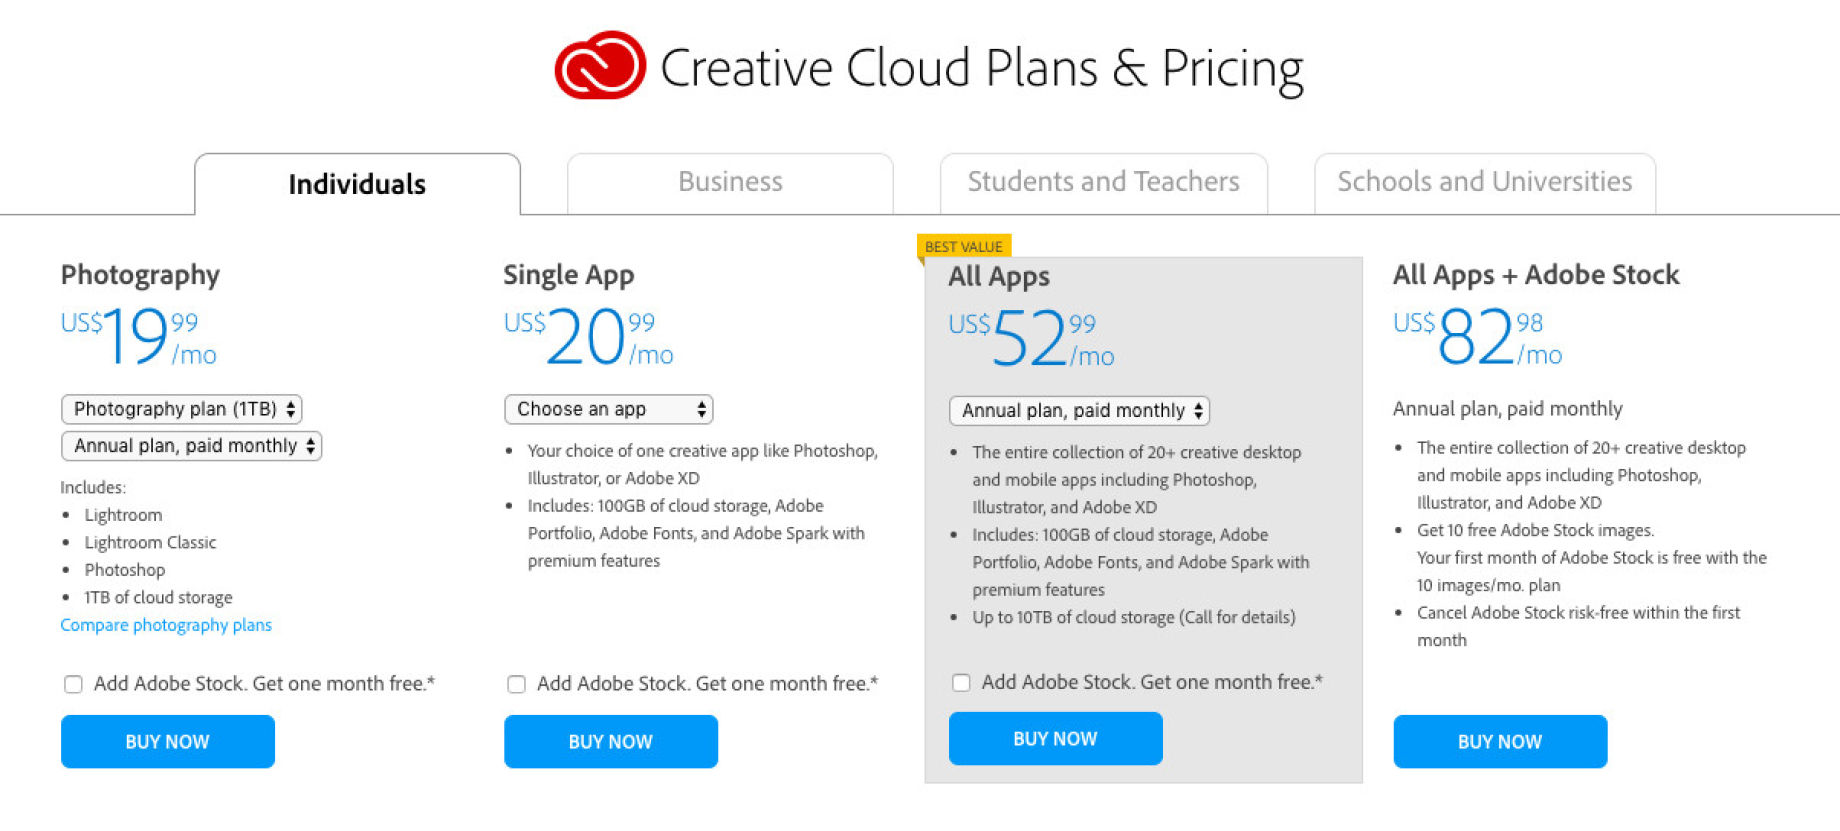 Adobe To Increase Prices